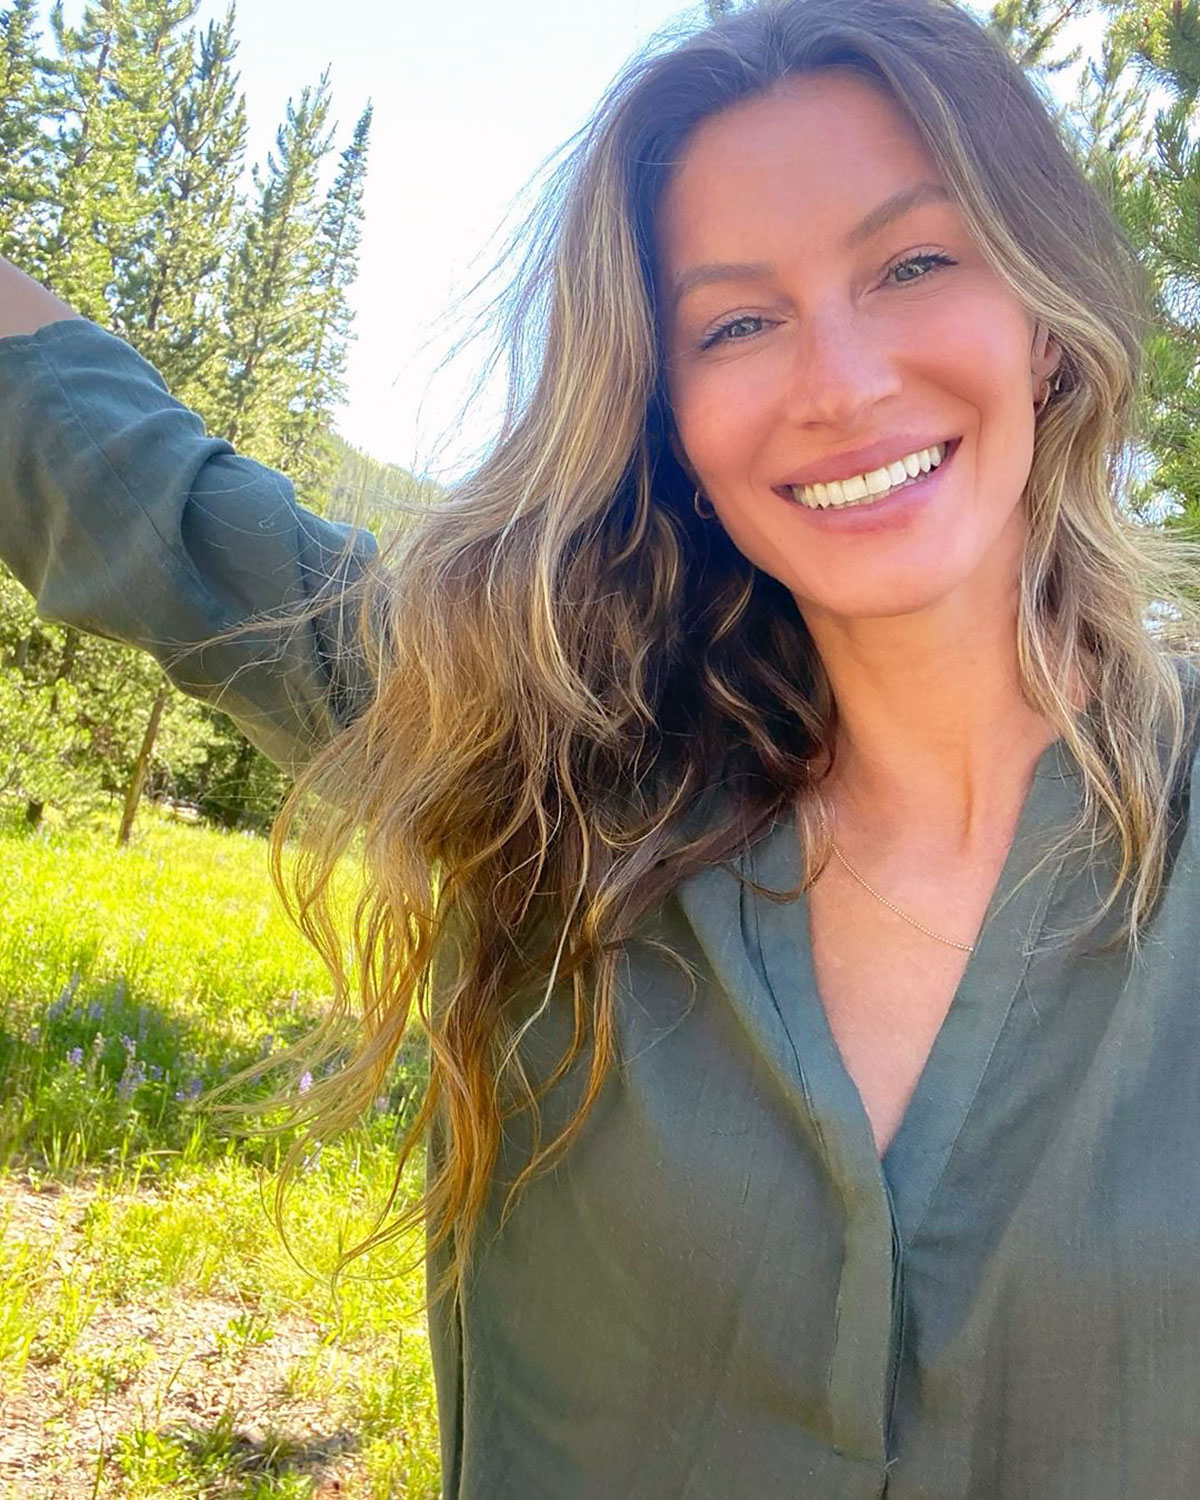 See the Stars' At-Home Style - Gisele Bundchen